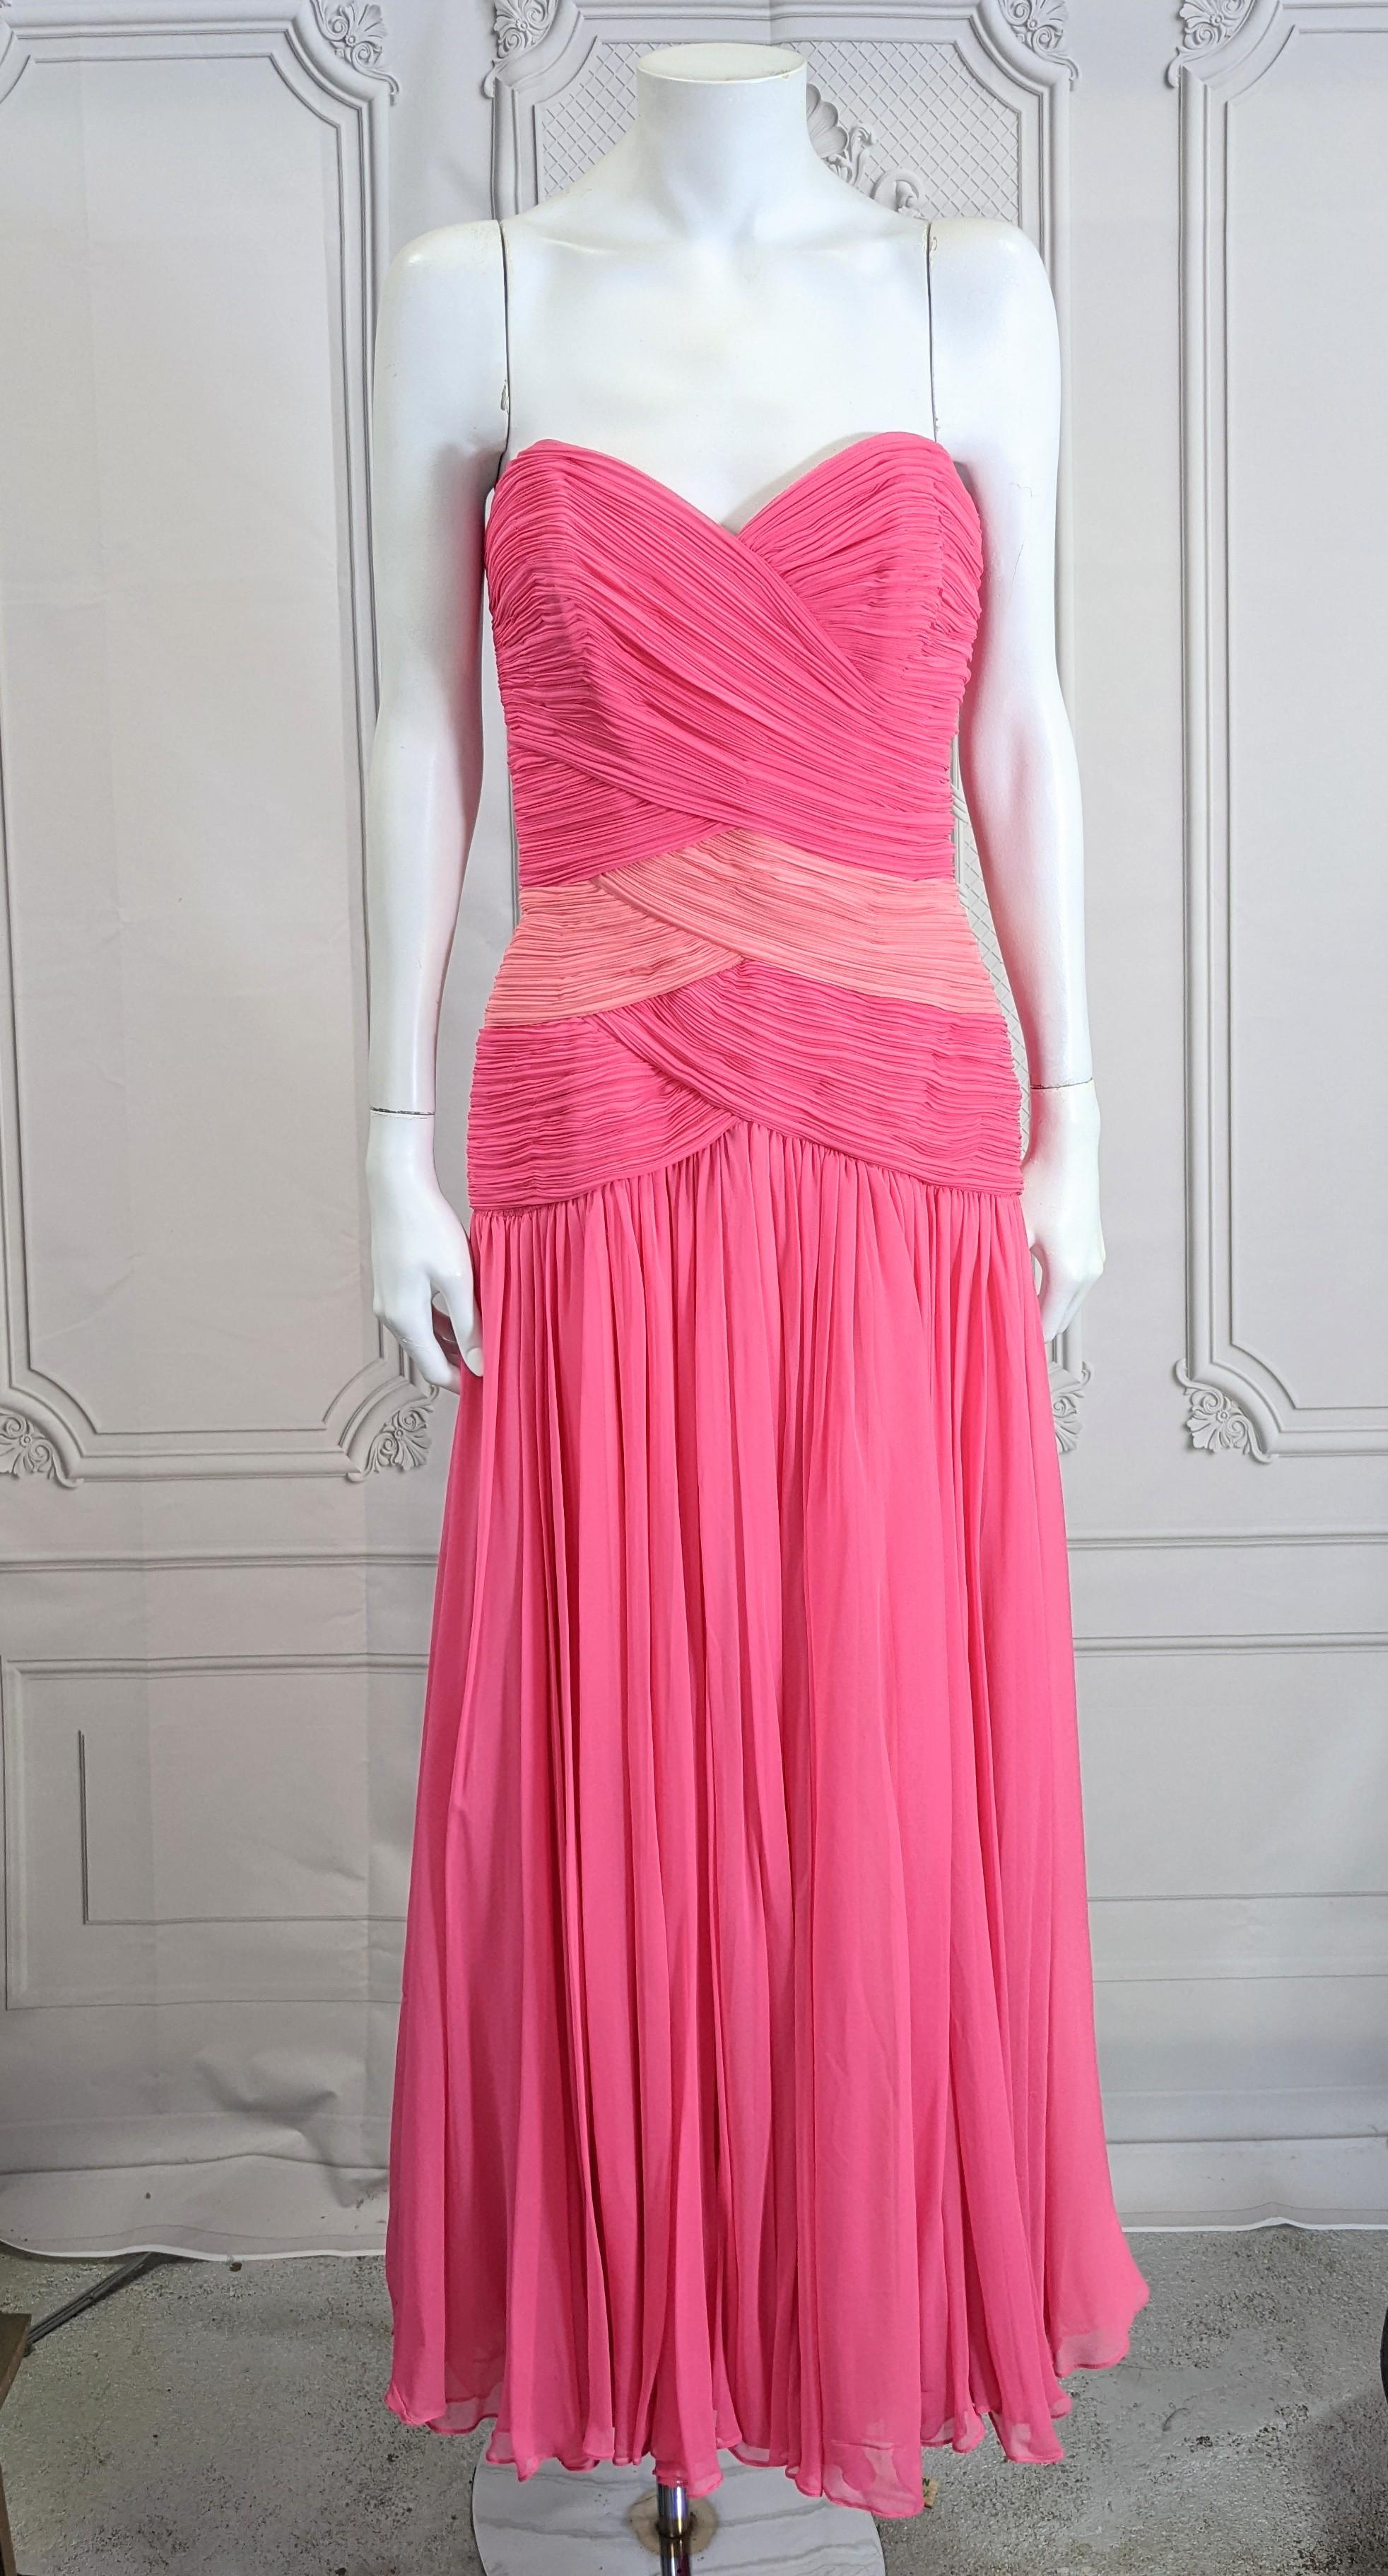 Glamorous Akira Silk Chiffon Draped Gown with a tight torso which opens to a super full layered chiffon skirt. Corset construction with hot and pale pink silk chiffon hand pleated and tacked onto strapless base with zipper entry, attached to a full